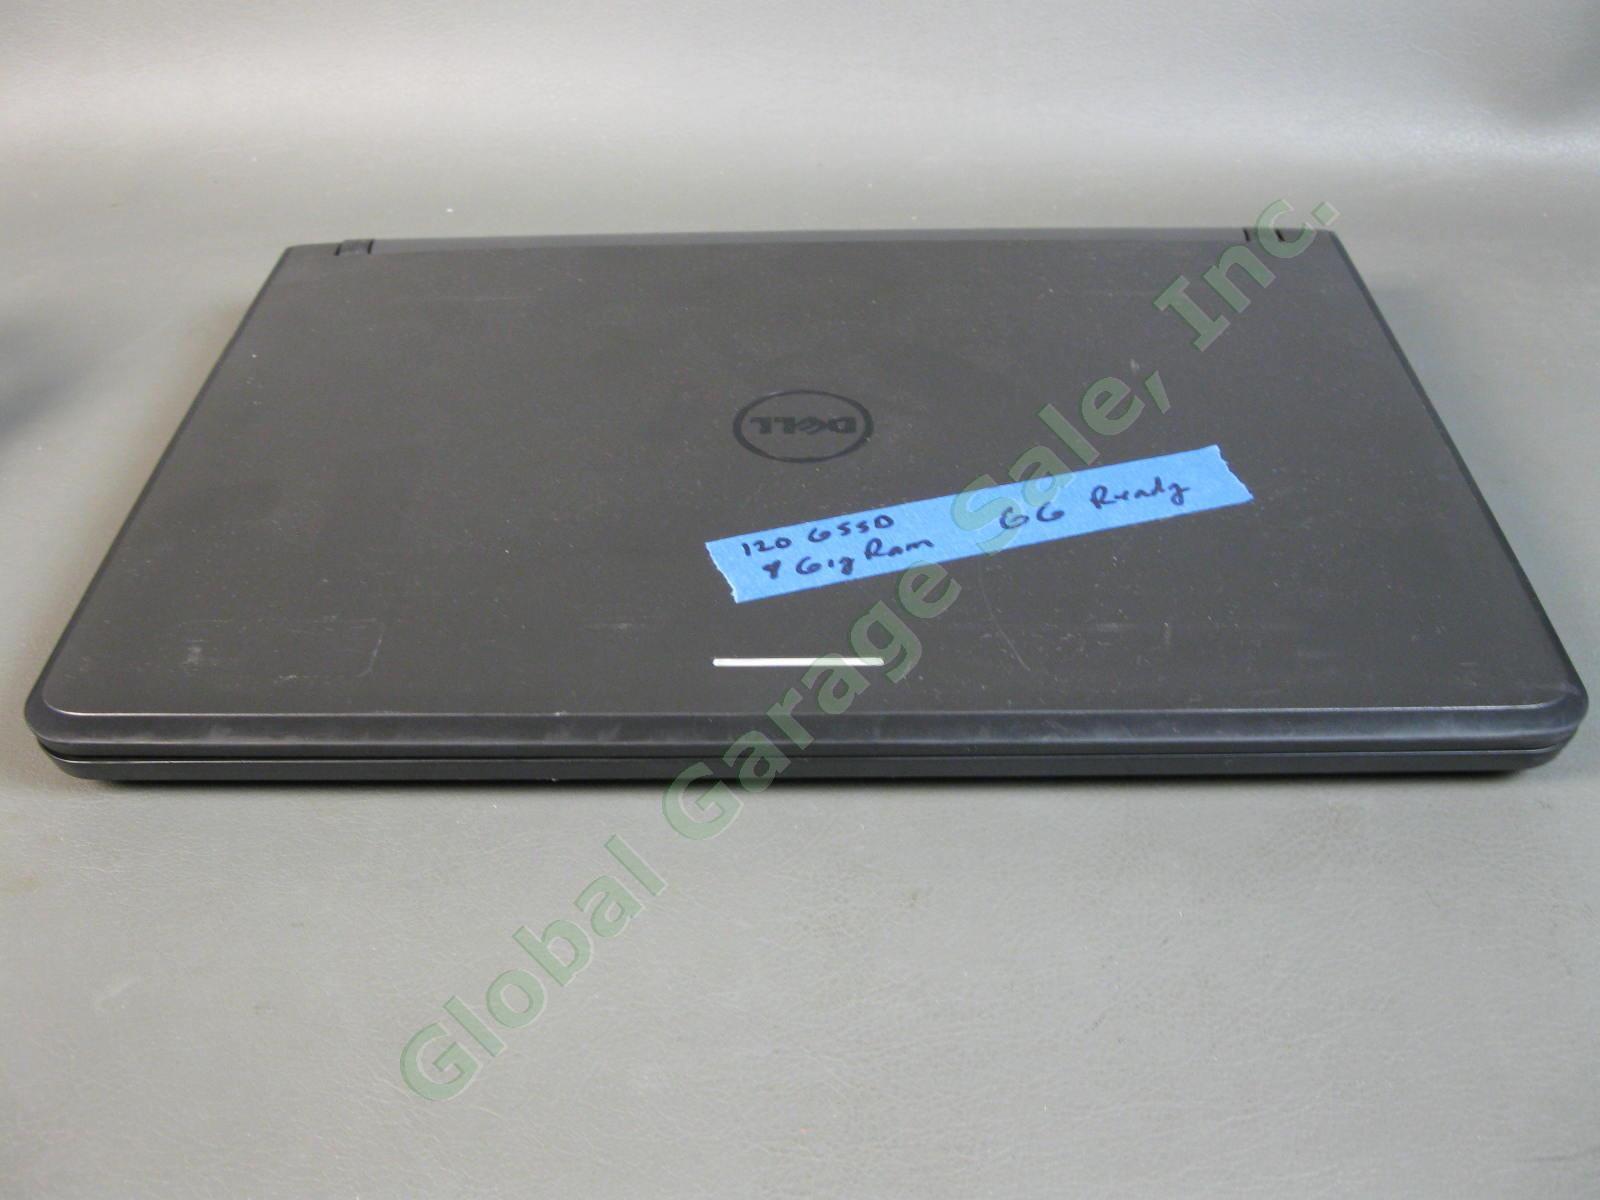 Dell Latitude 3340 Laptop Computer 8GB RAM 120GB SSD 13" Great Condition NO OS 3